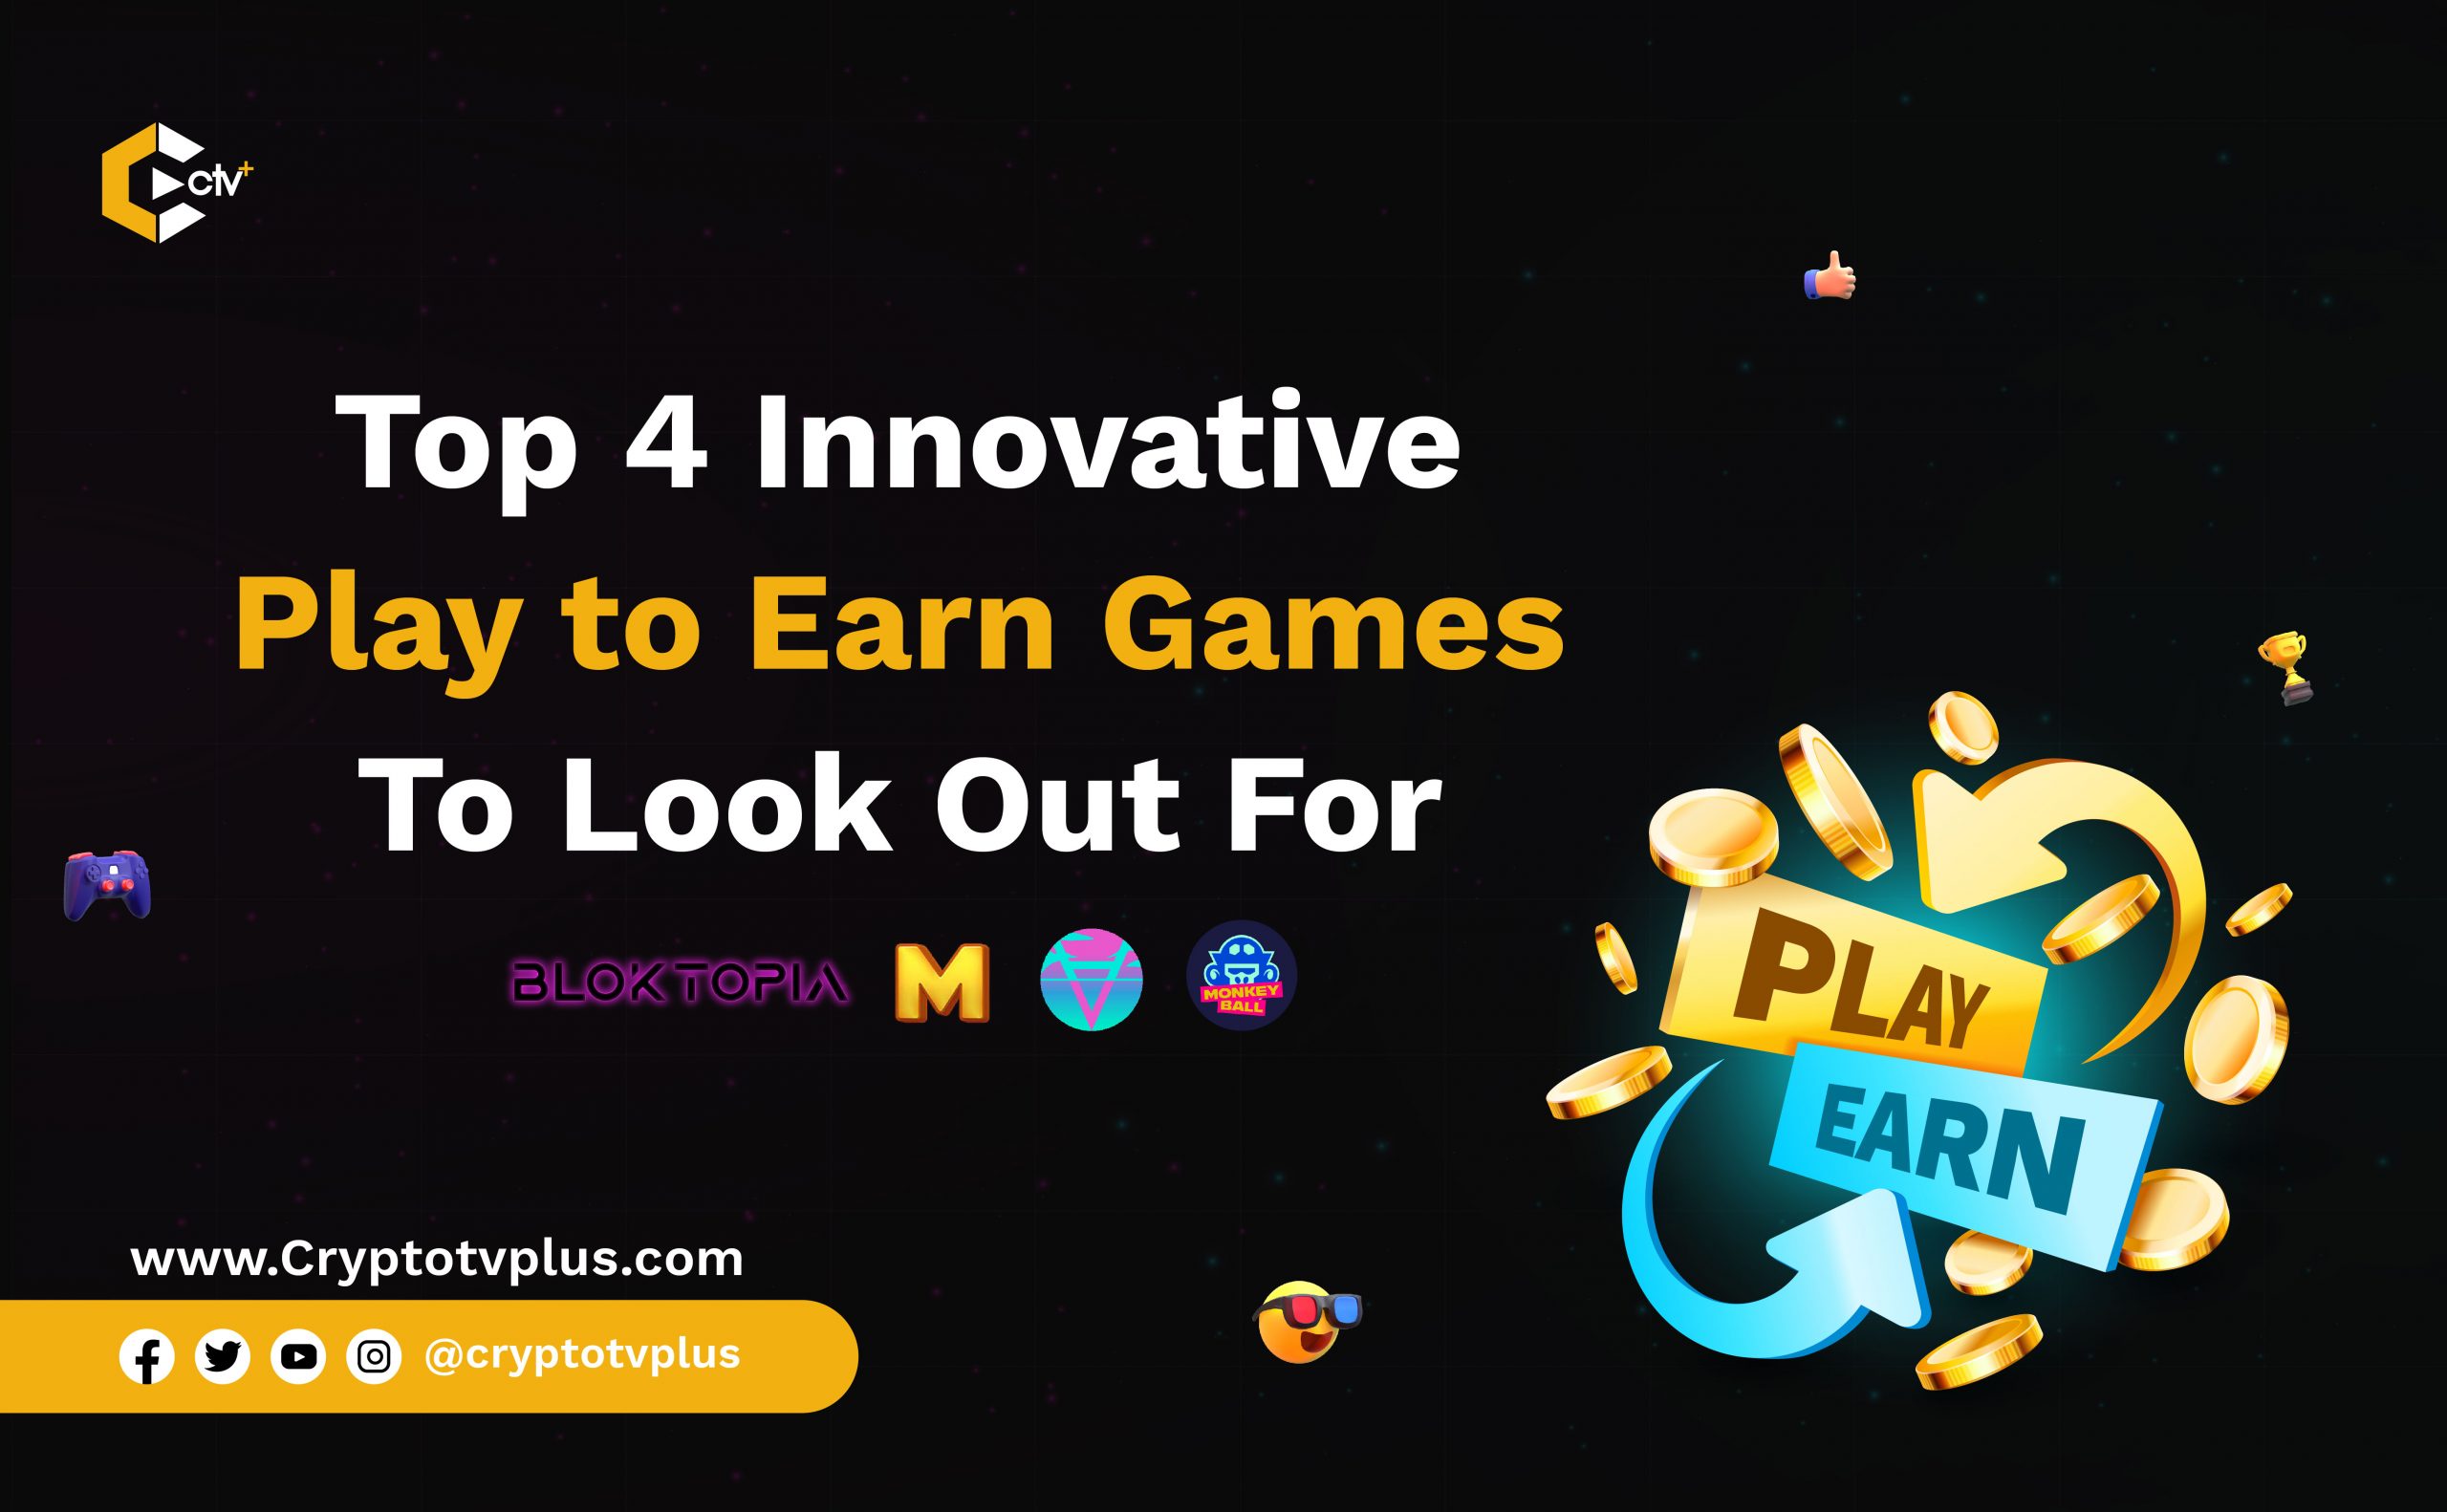 Top 4 Innovative Play to Earn Games To Look Out For